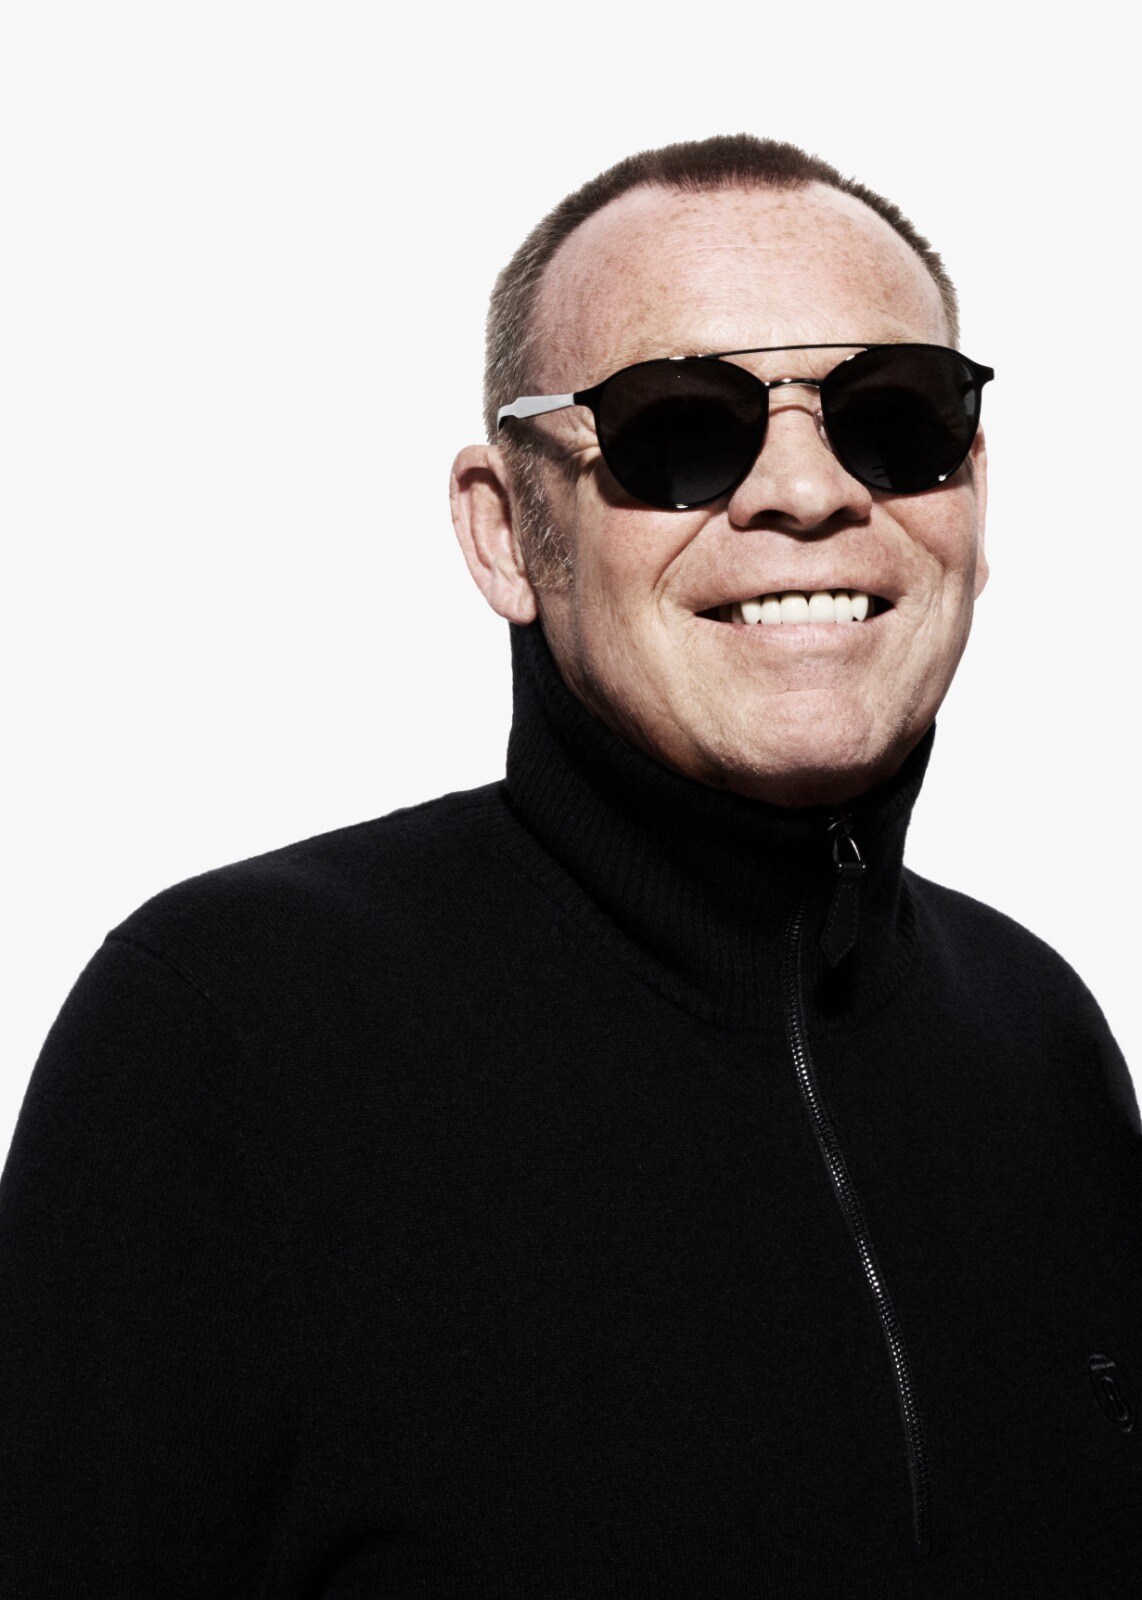 British reggae band UB40, fronted by Ali Campbell, will return to Malaga province again for a concert on Saturday 6 August